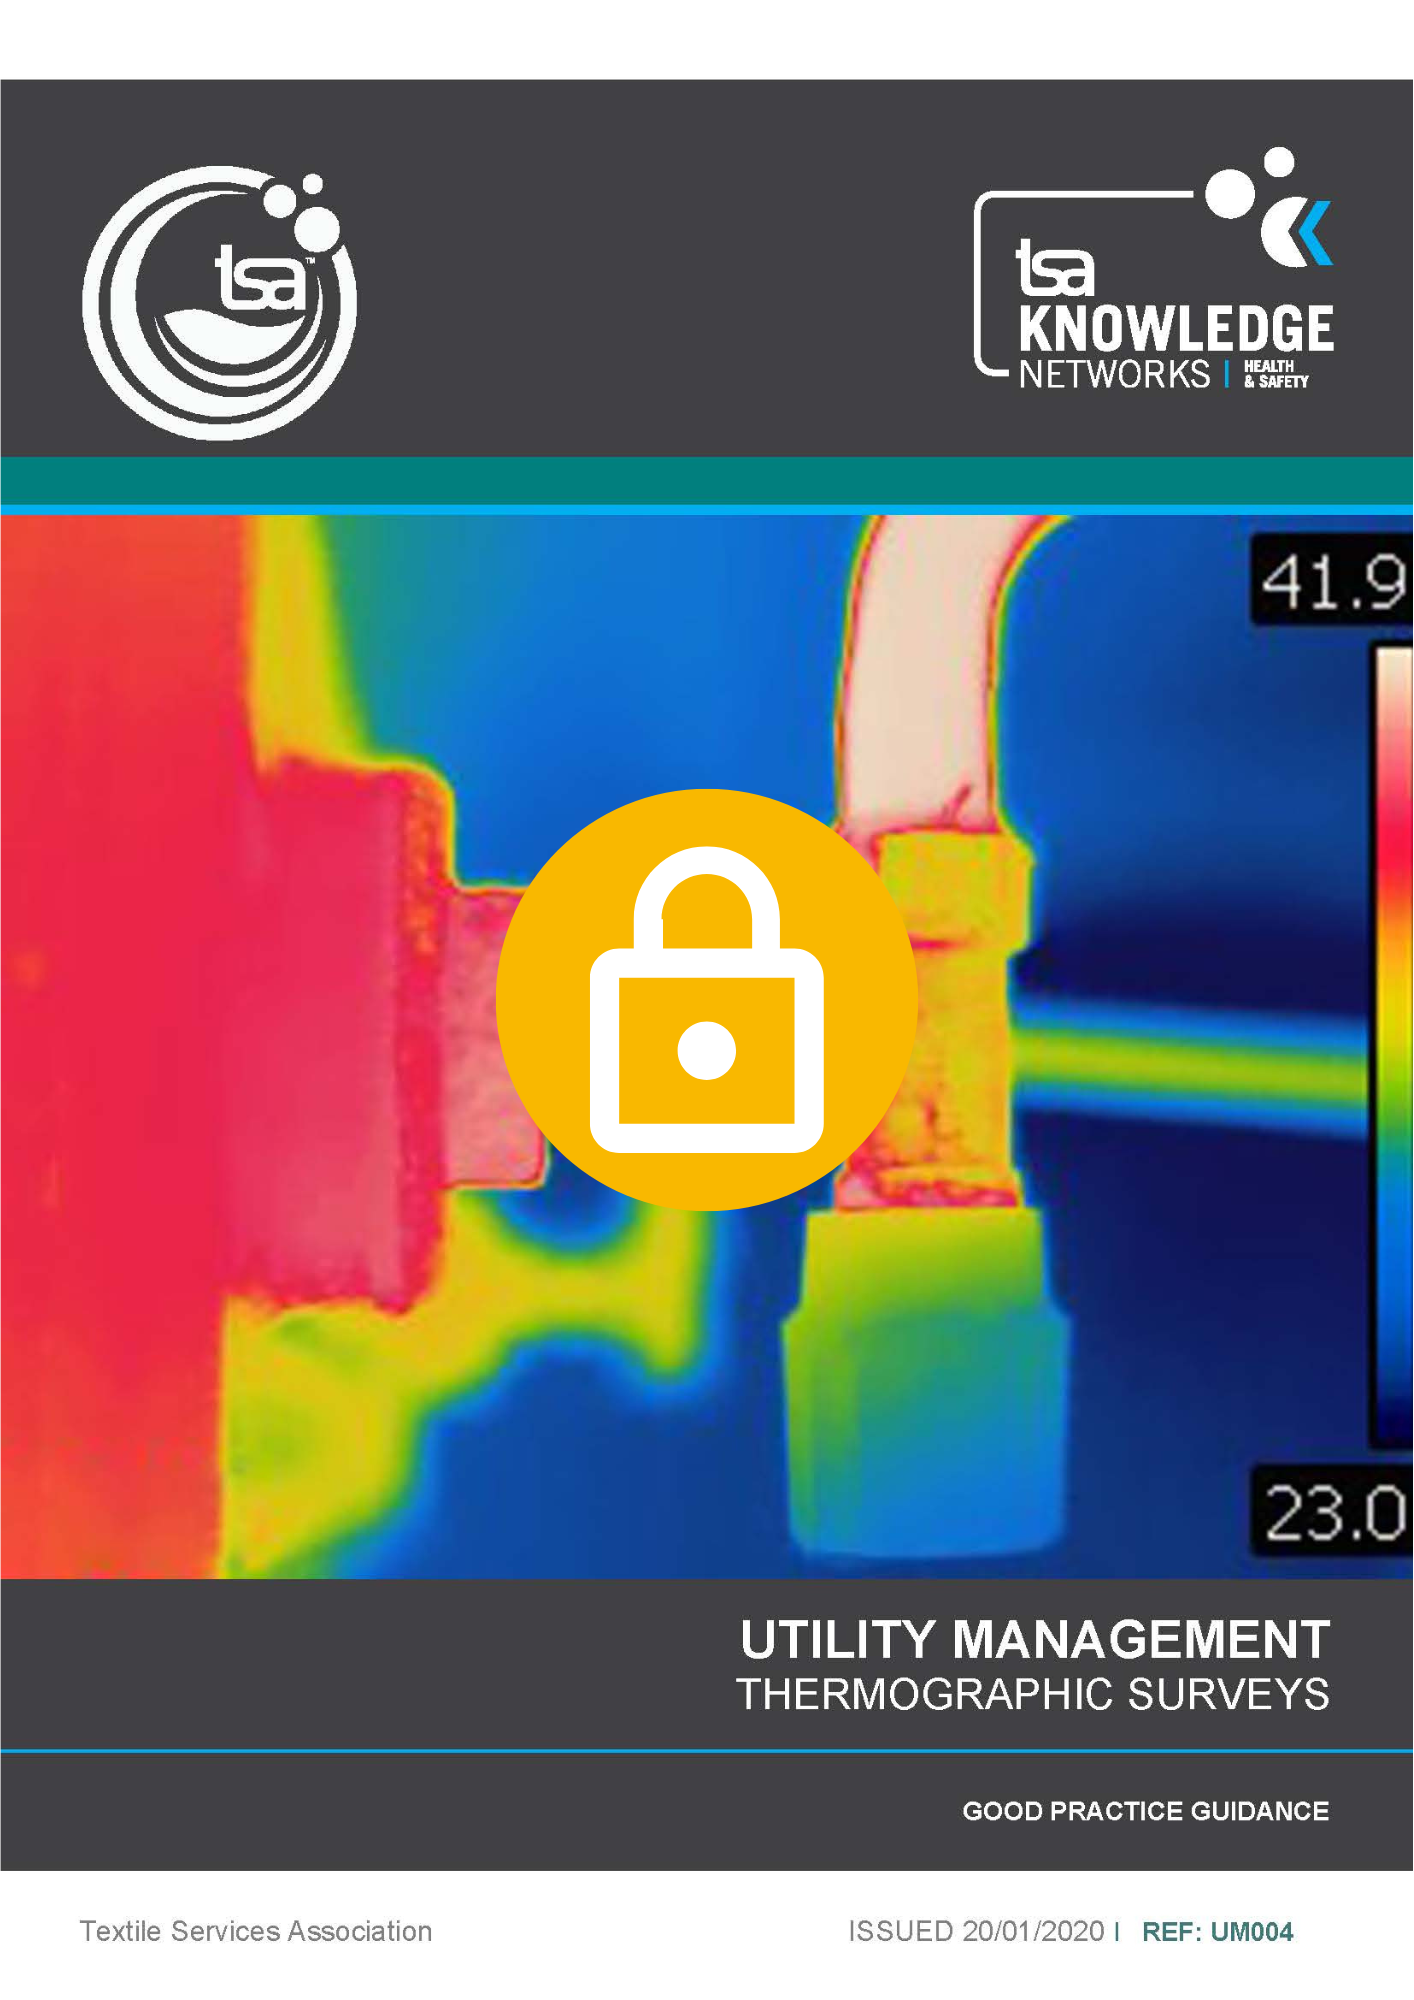 Fire Safety: Thermographic Survey